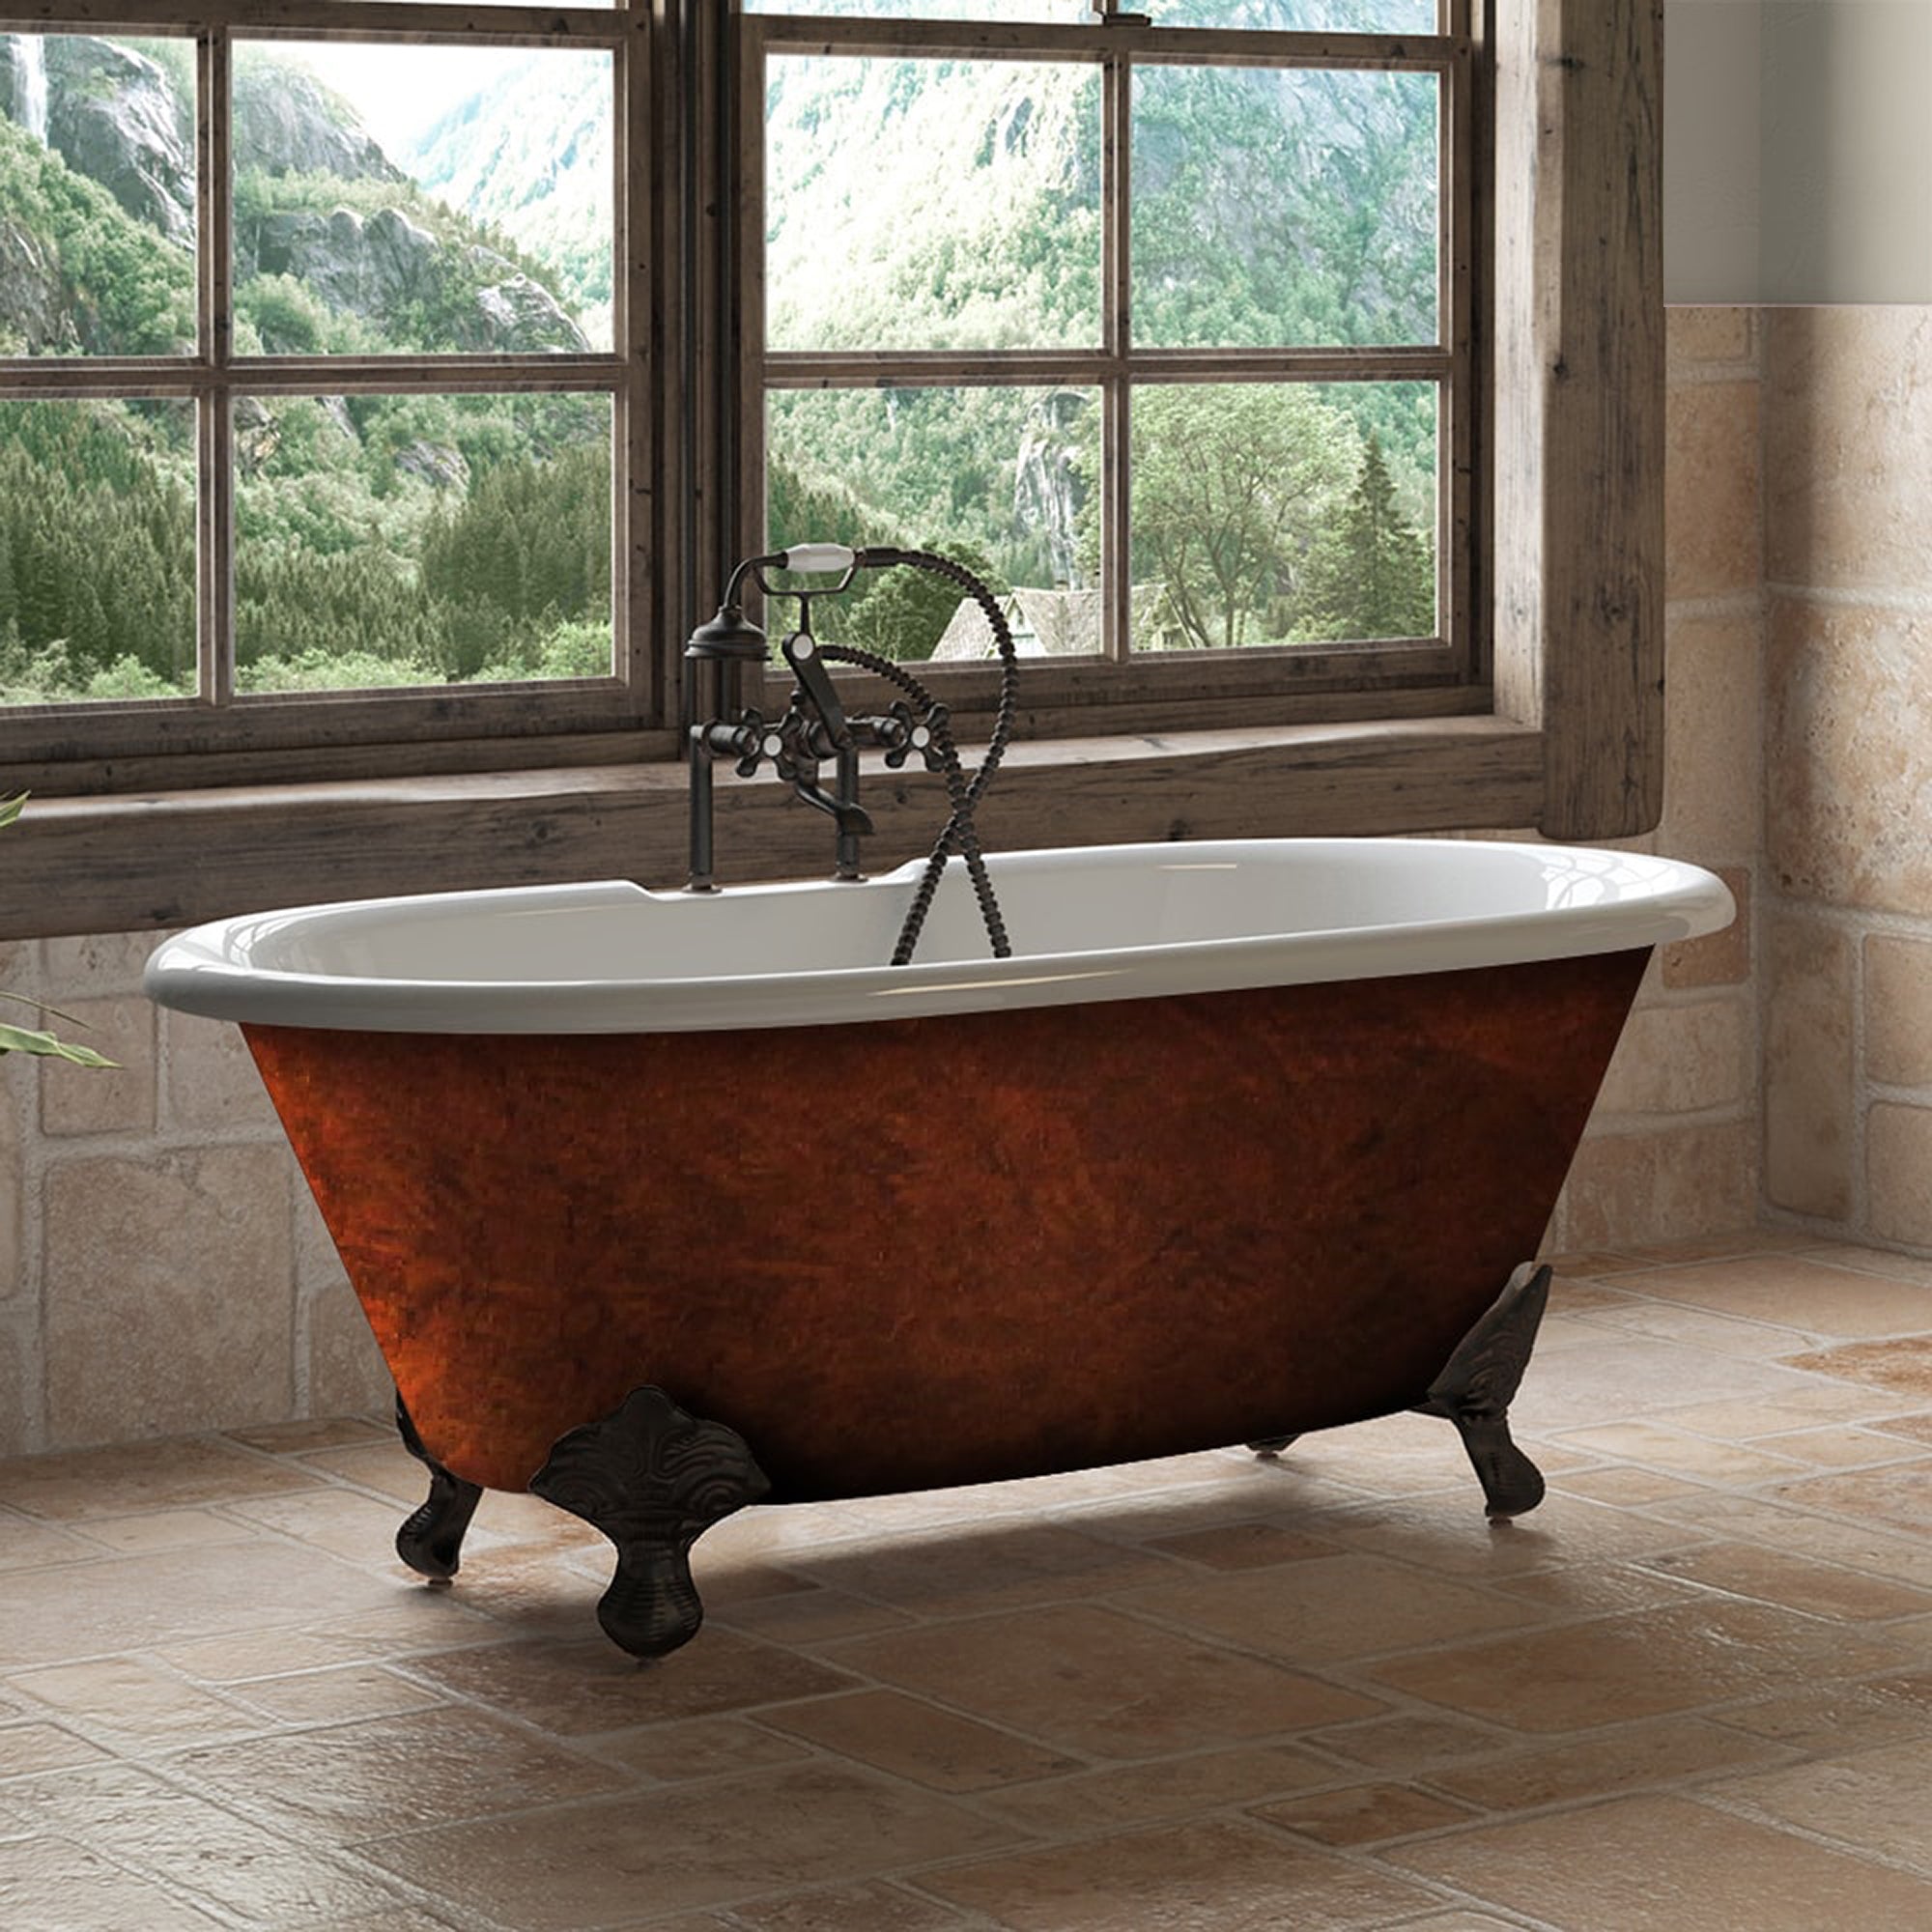 Cambridge Plumbing 70”x30" Faux Copper Bronze Finish on Exterior Cast Iron Clawfoot Bathtub (Hand Painted Faux Copper Bronze Finish)  with 7" Deck Mount Faucet Drillings and Oil Rubbed Bronze Feet DE60-DH-ORB-CB - Vital Hydrotherapy